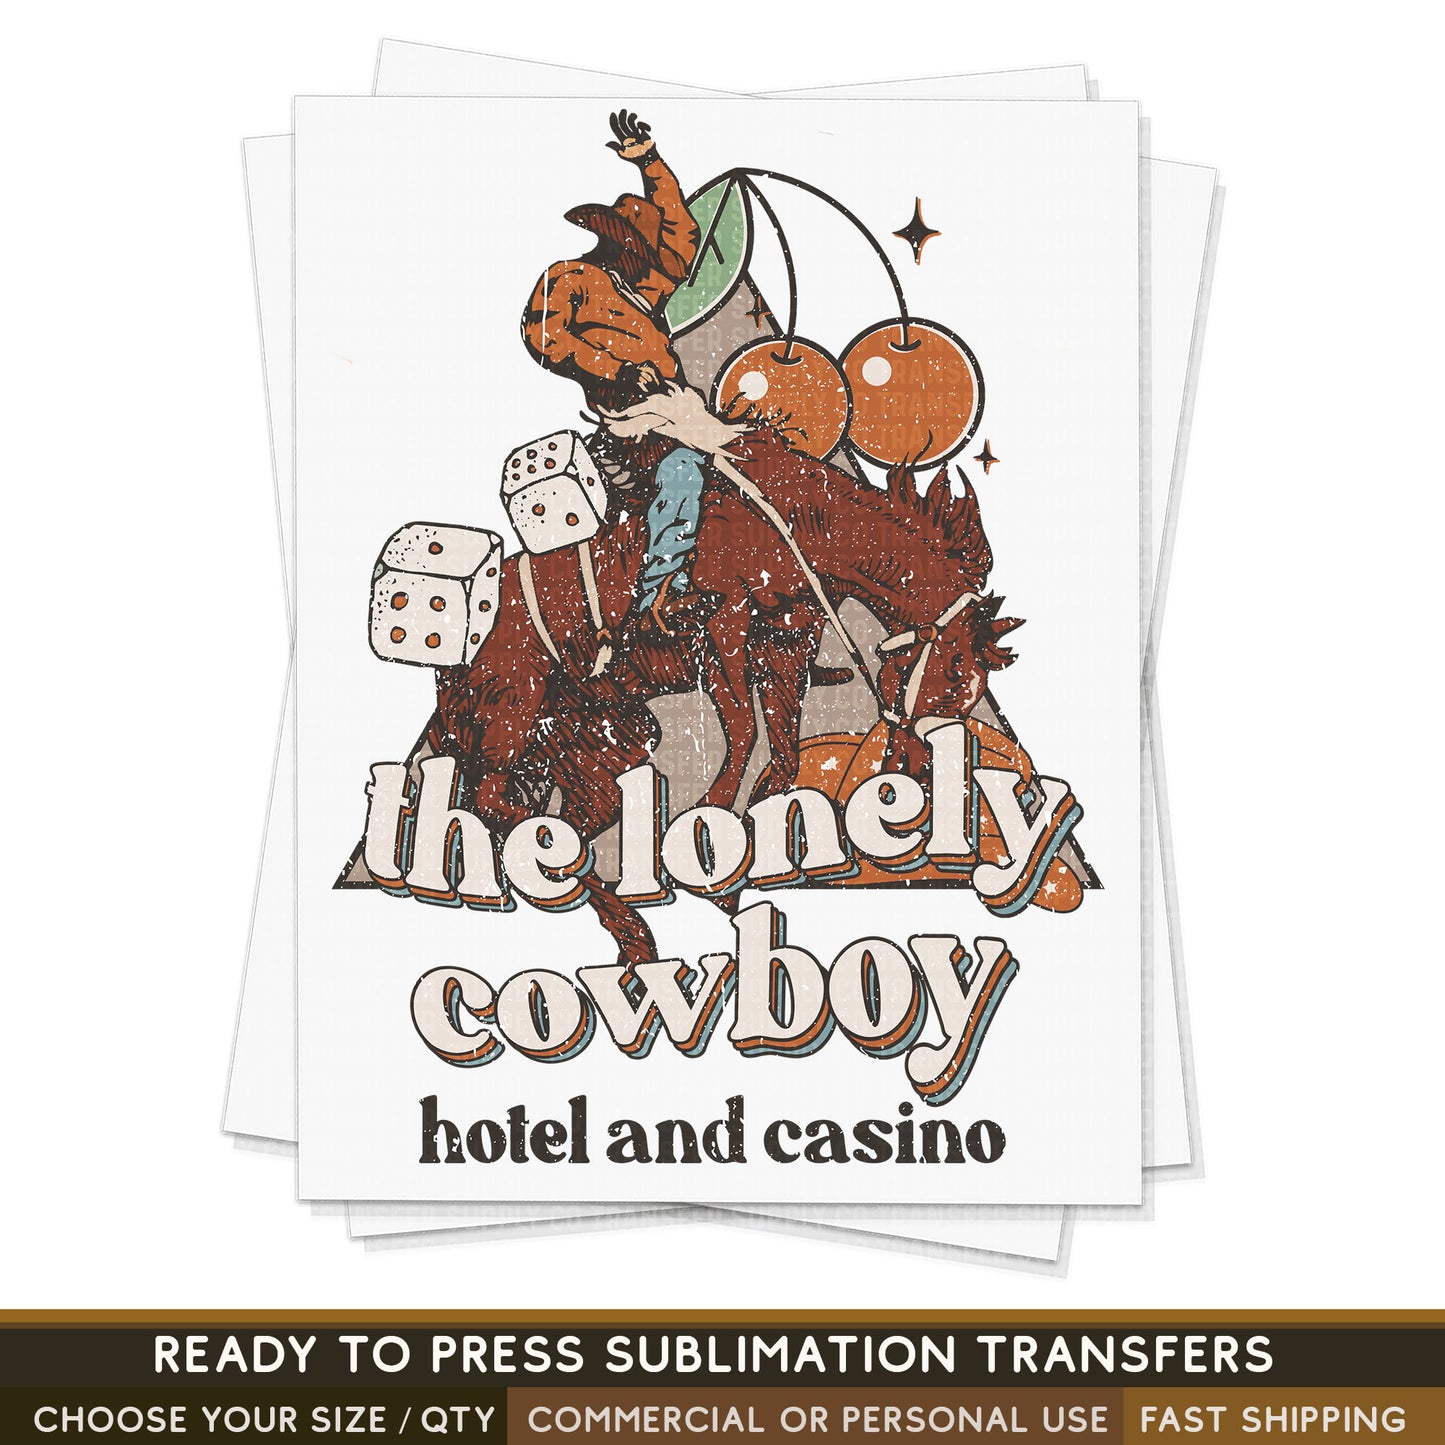 Lonely Cowboys Hotel, Western Ready To Press Sublimation Transfers, Ready To Press, Sublimation Prints, Sublimation Transfers